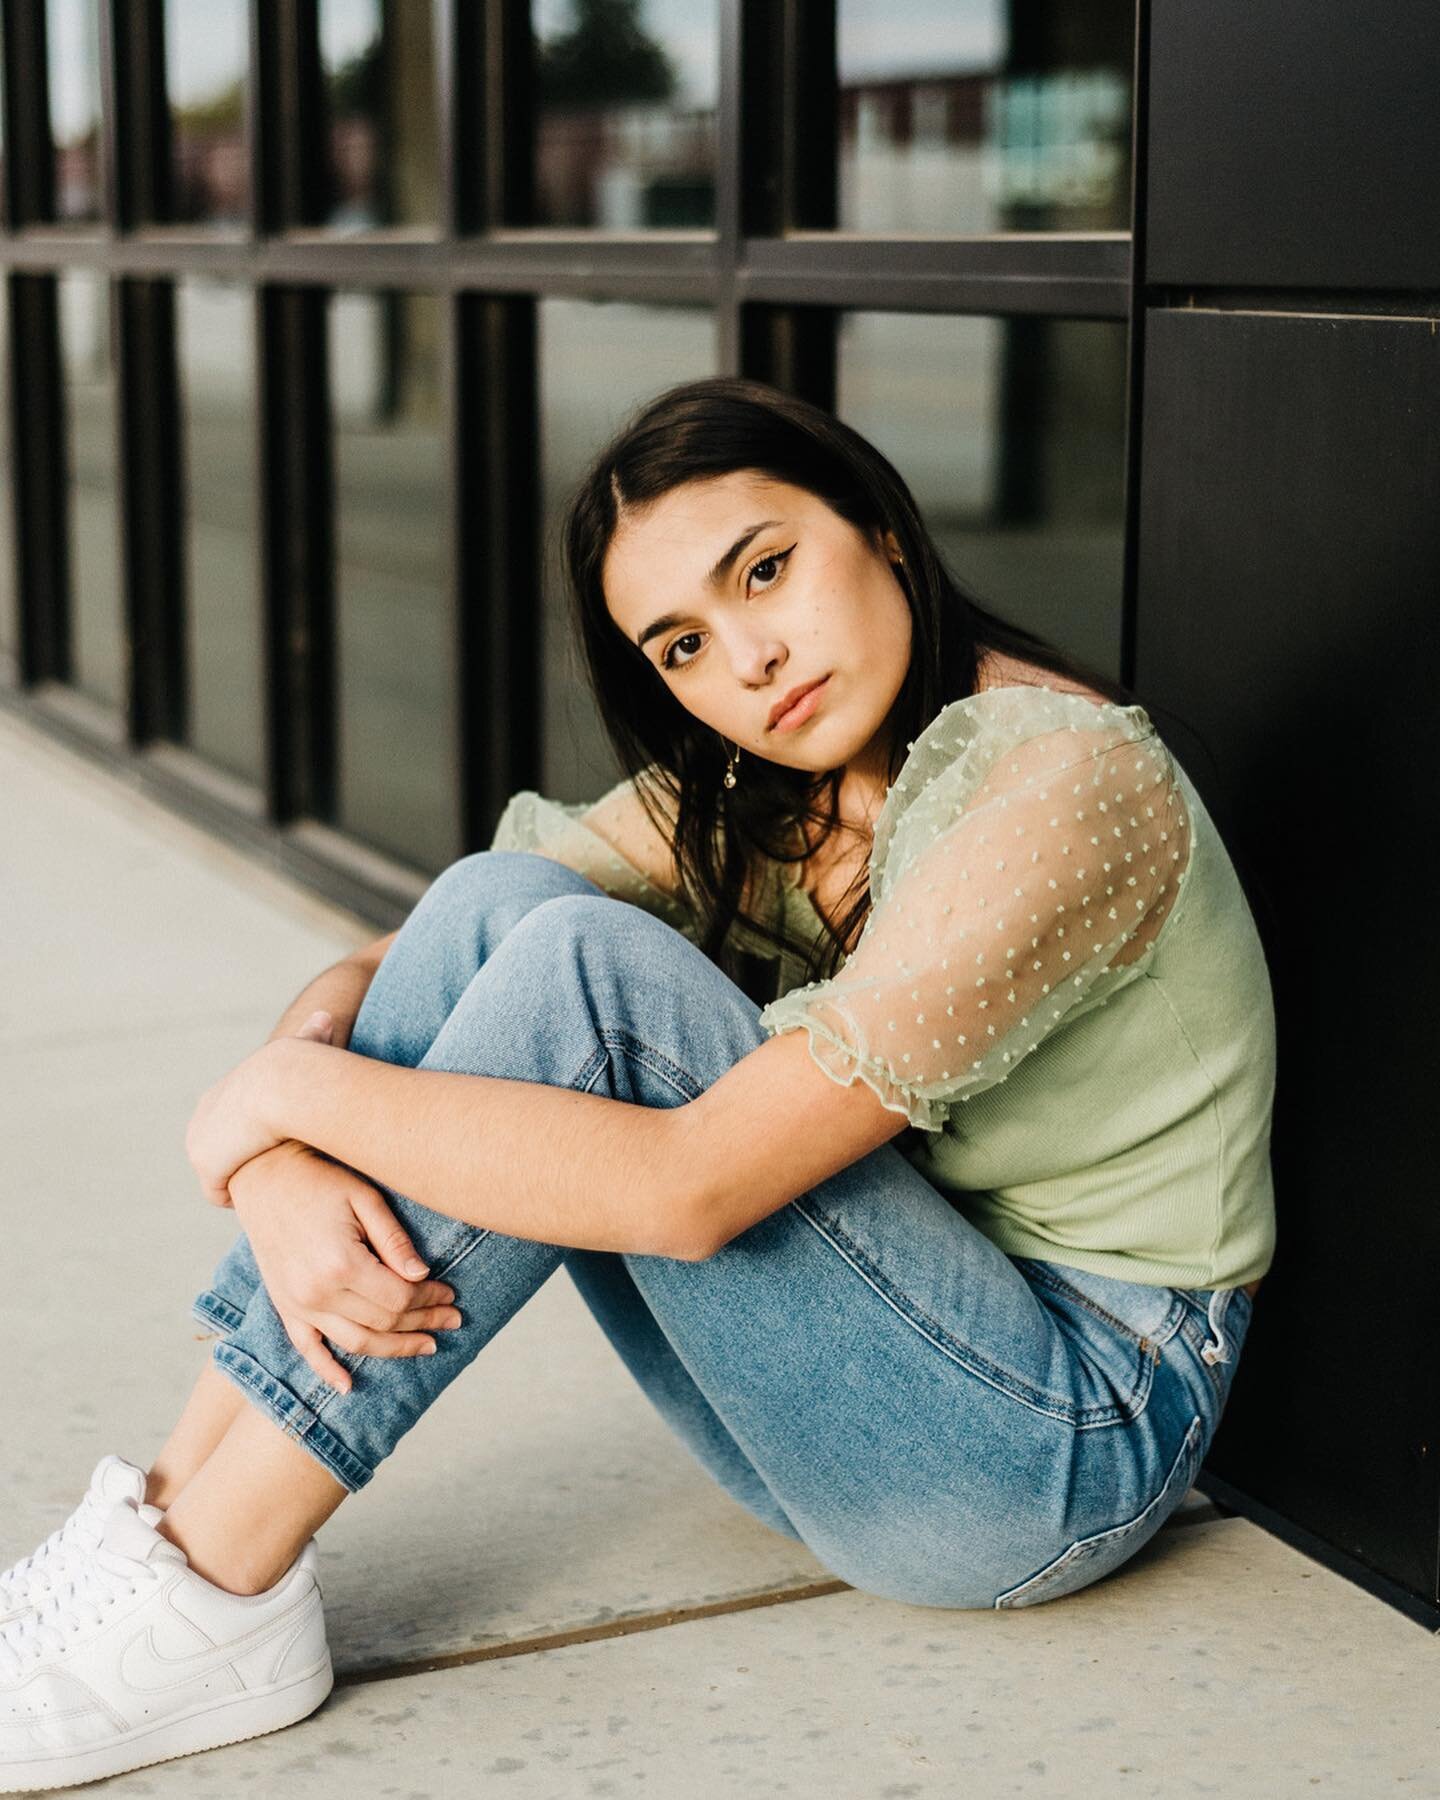 ✨Senior Sunday✨

We had a blast shooting this senior session at various locations downtown!!! Even more special, we were able to include some beautiful murals that held sentimental meaning to her and her family! 🤩